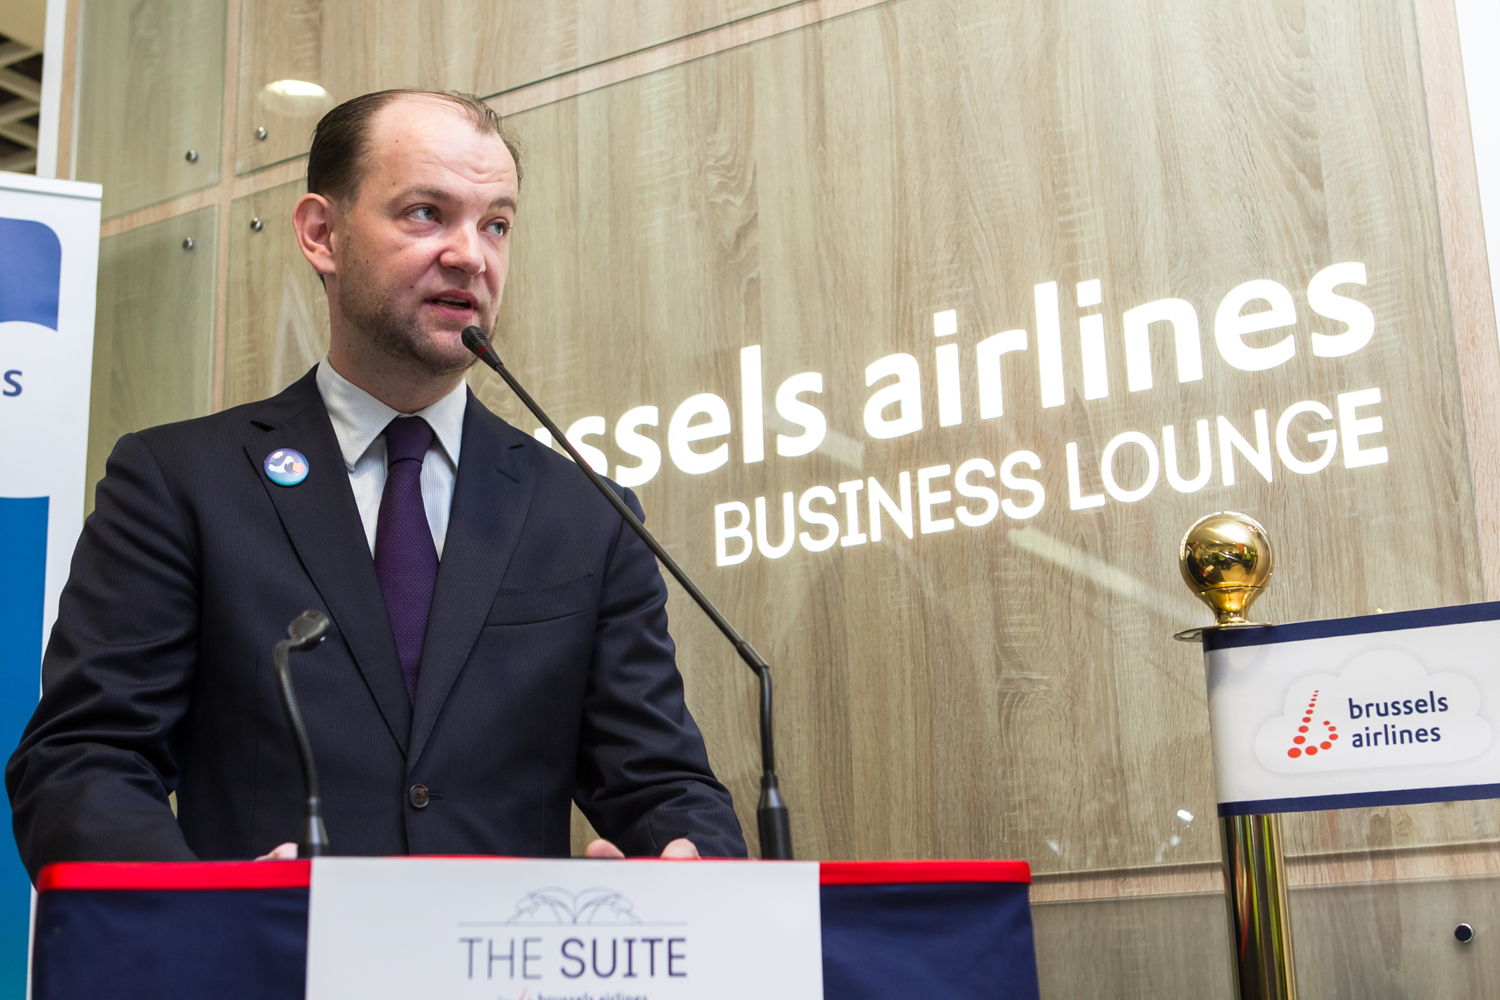 Patrick Roofthooft, Brussels Airlines Country Manager RDC